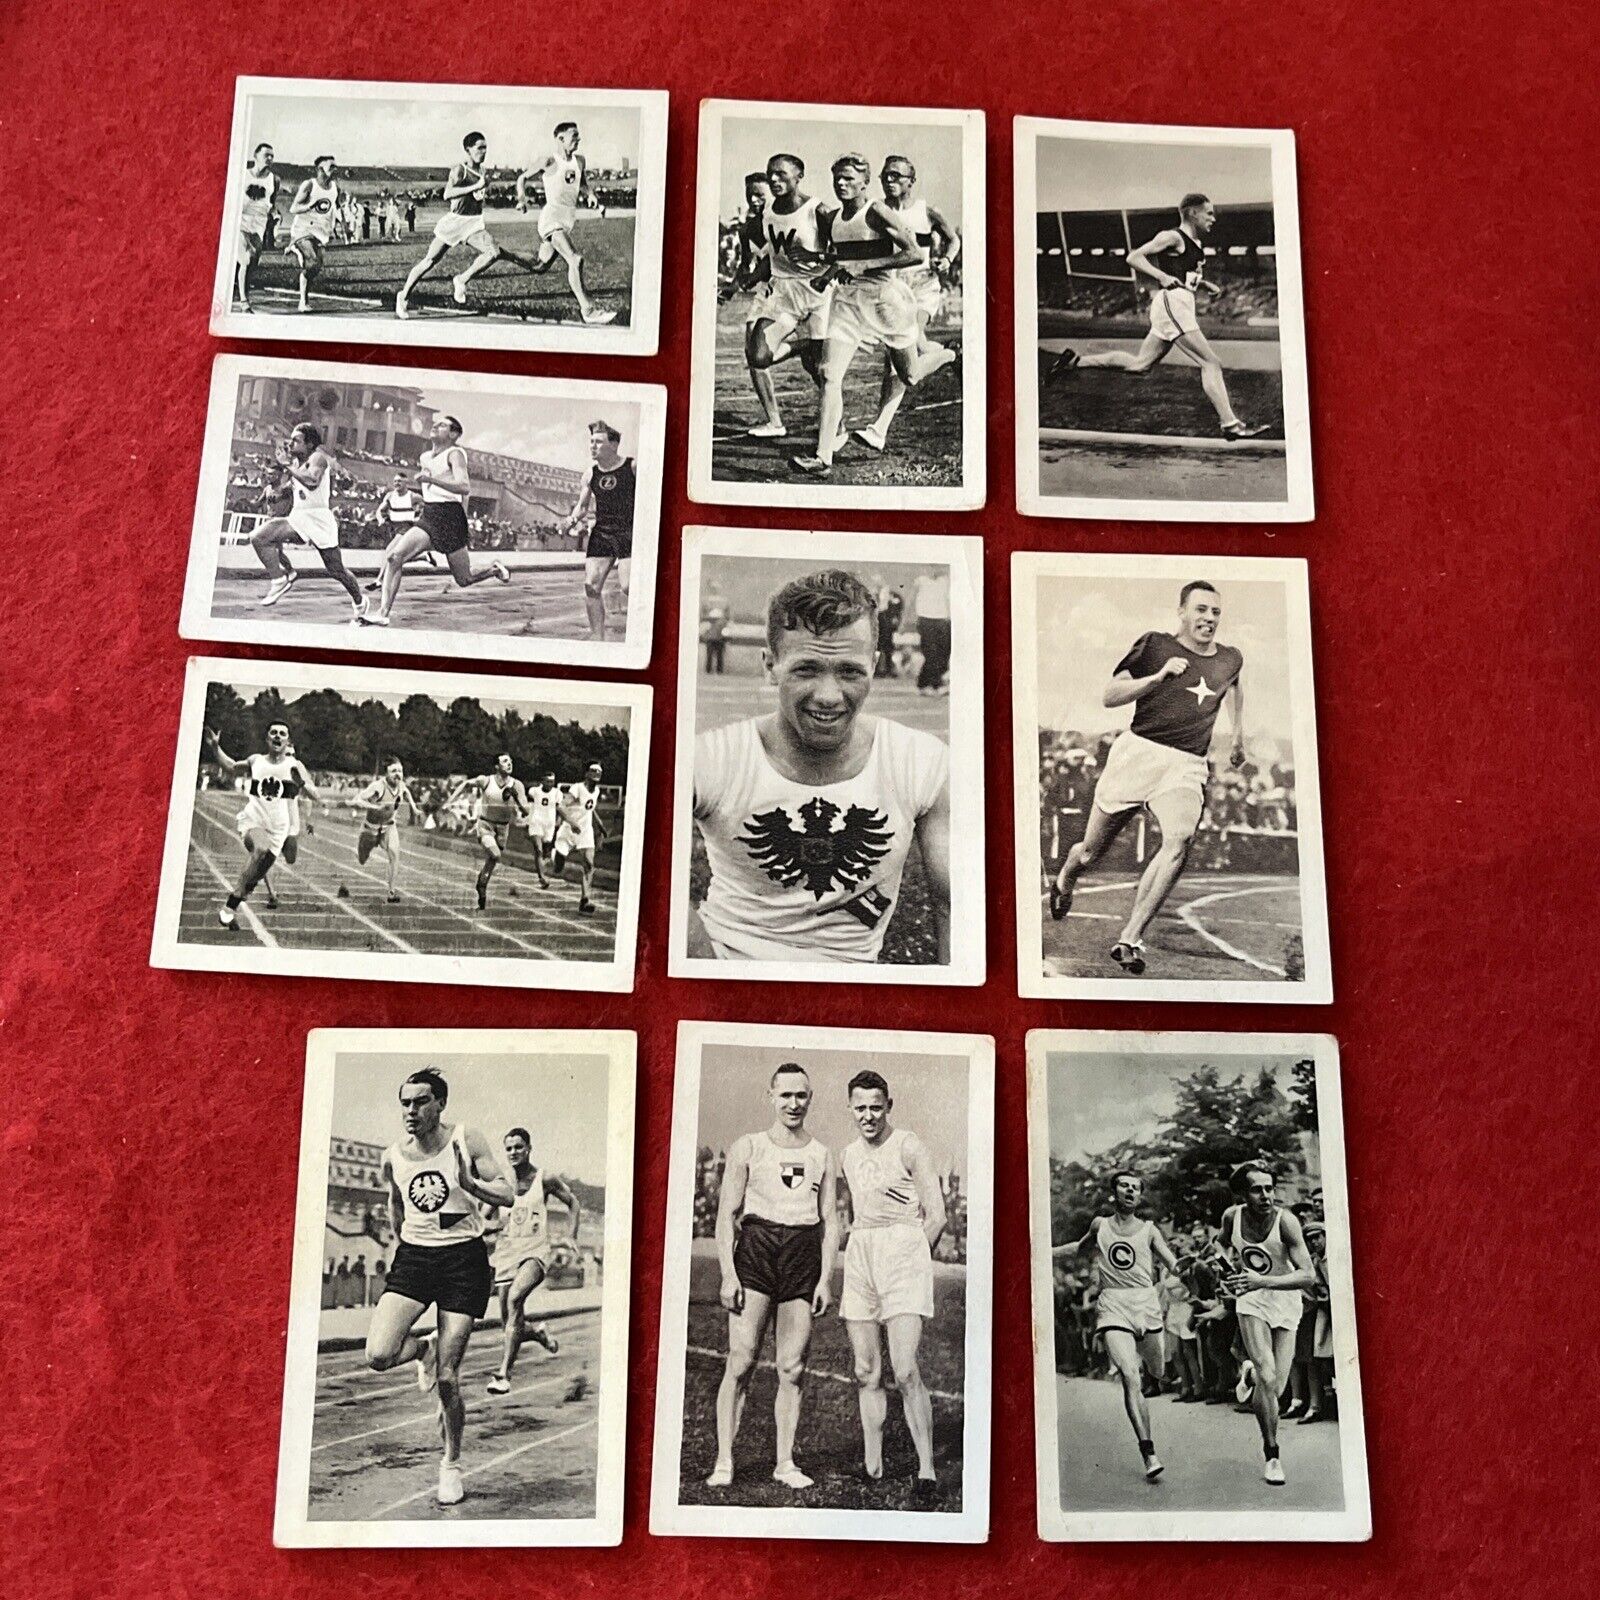 1932 Bulgaria Sports Photos Tobacco Card Lot (10) All G-VG Track & Field Subject